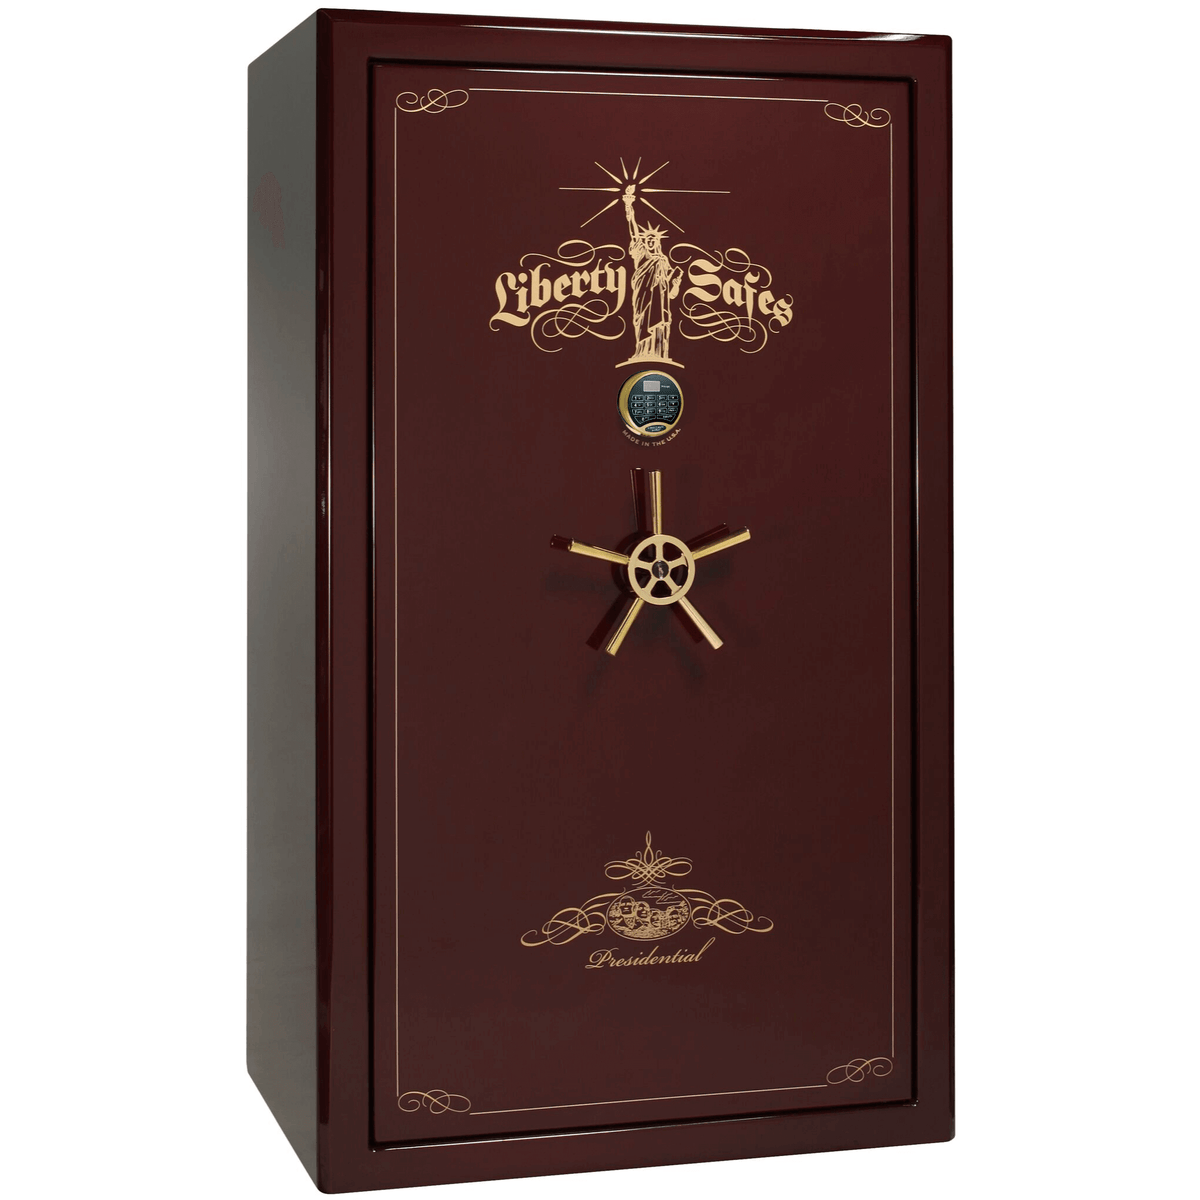 Liberty Safe Presidential 50 in Burgundy Gloss with 24k Gold Electronic Lock, closed door.